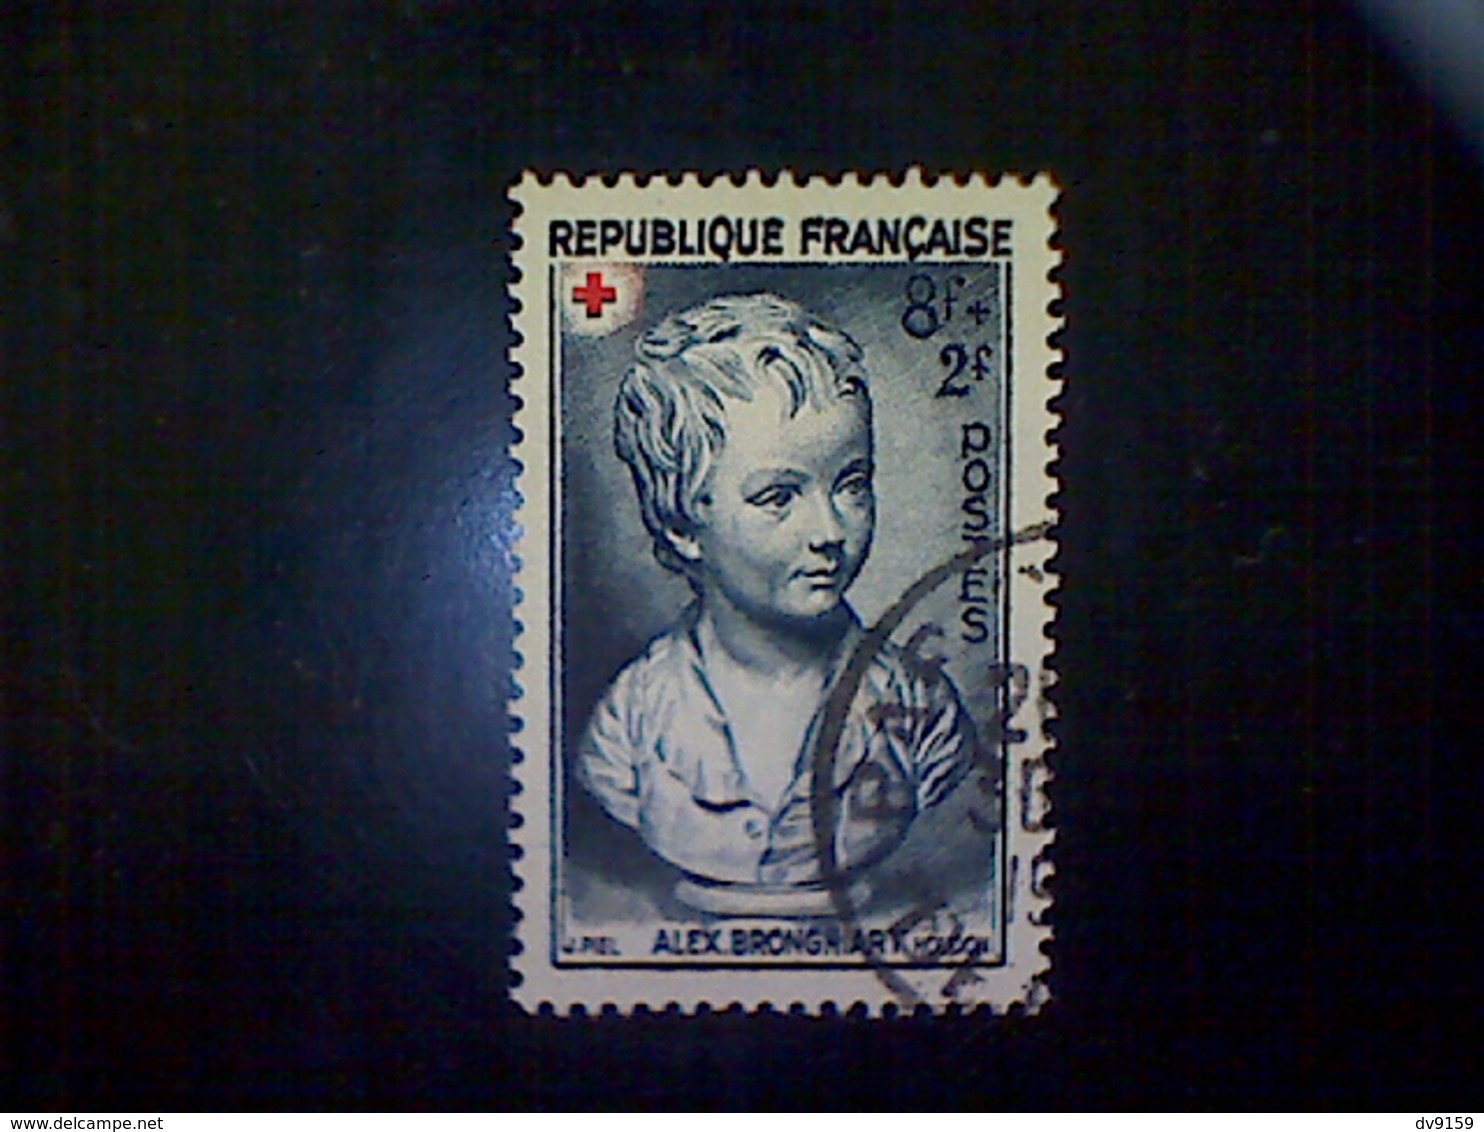 France, Scott #B255, Used(o), 1950 Red Cross Charity Issue, Alexandre Brongniart, (8+2)frs, Indigo And Carmine - Used Stamps